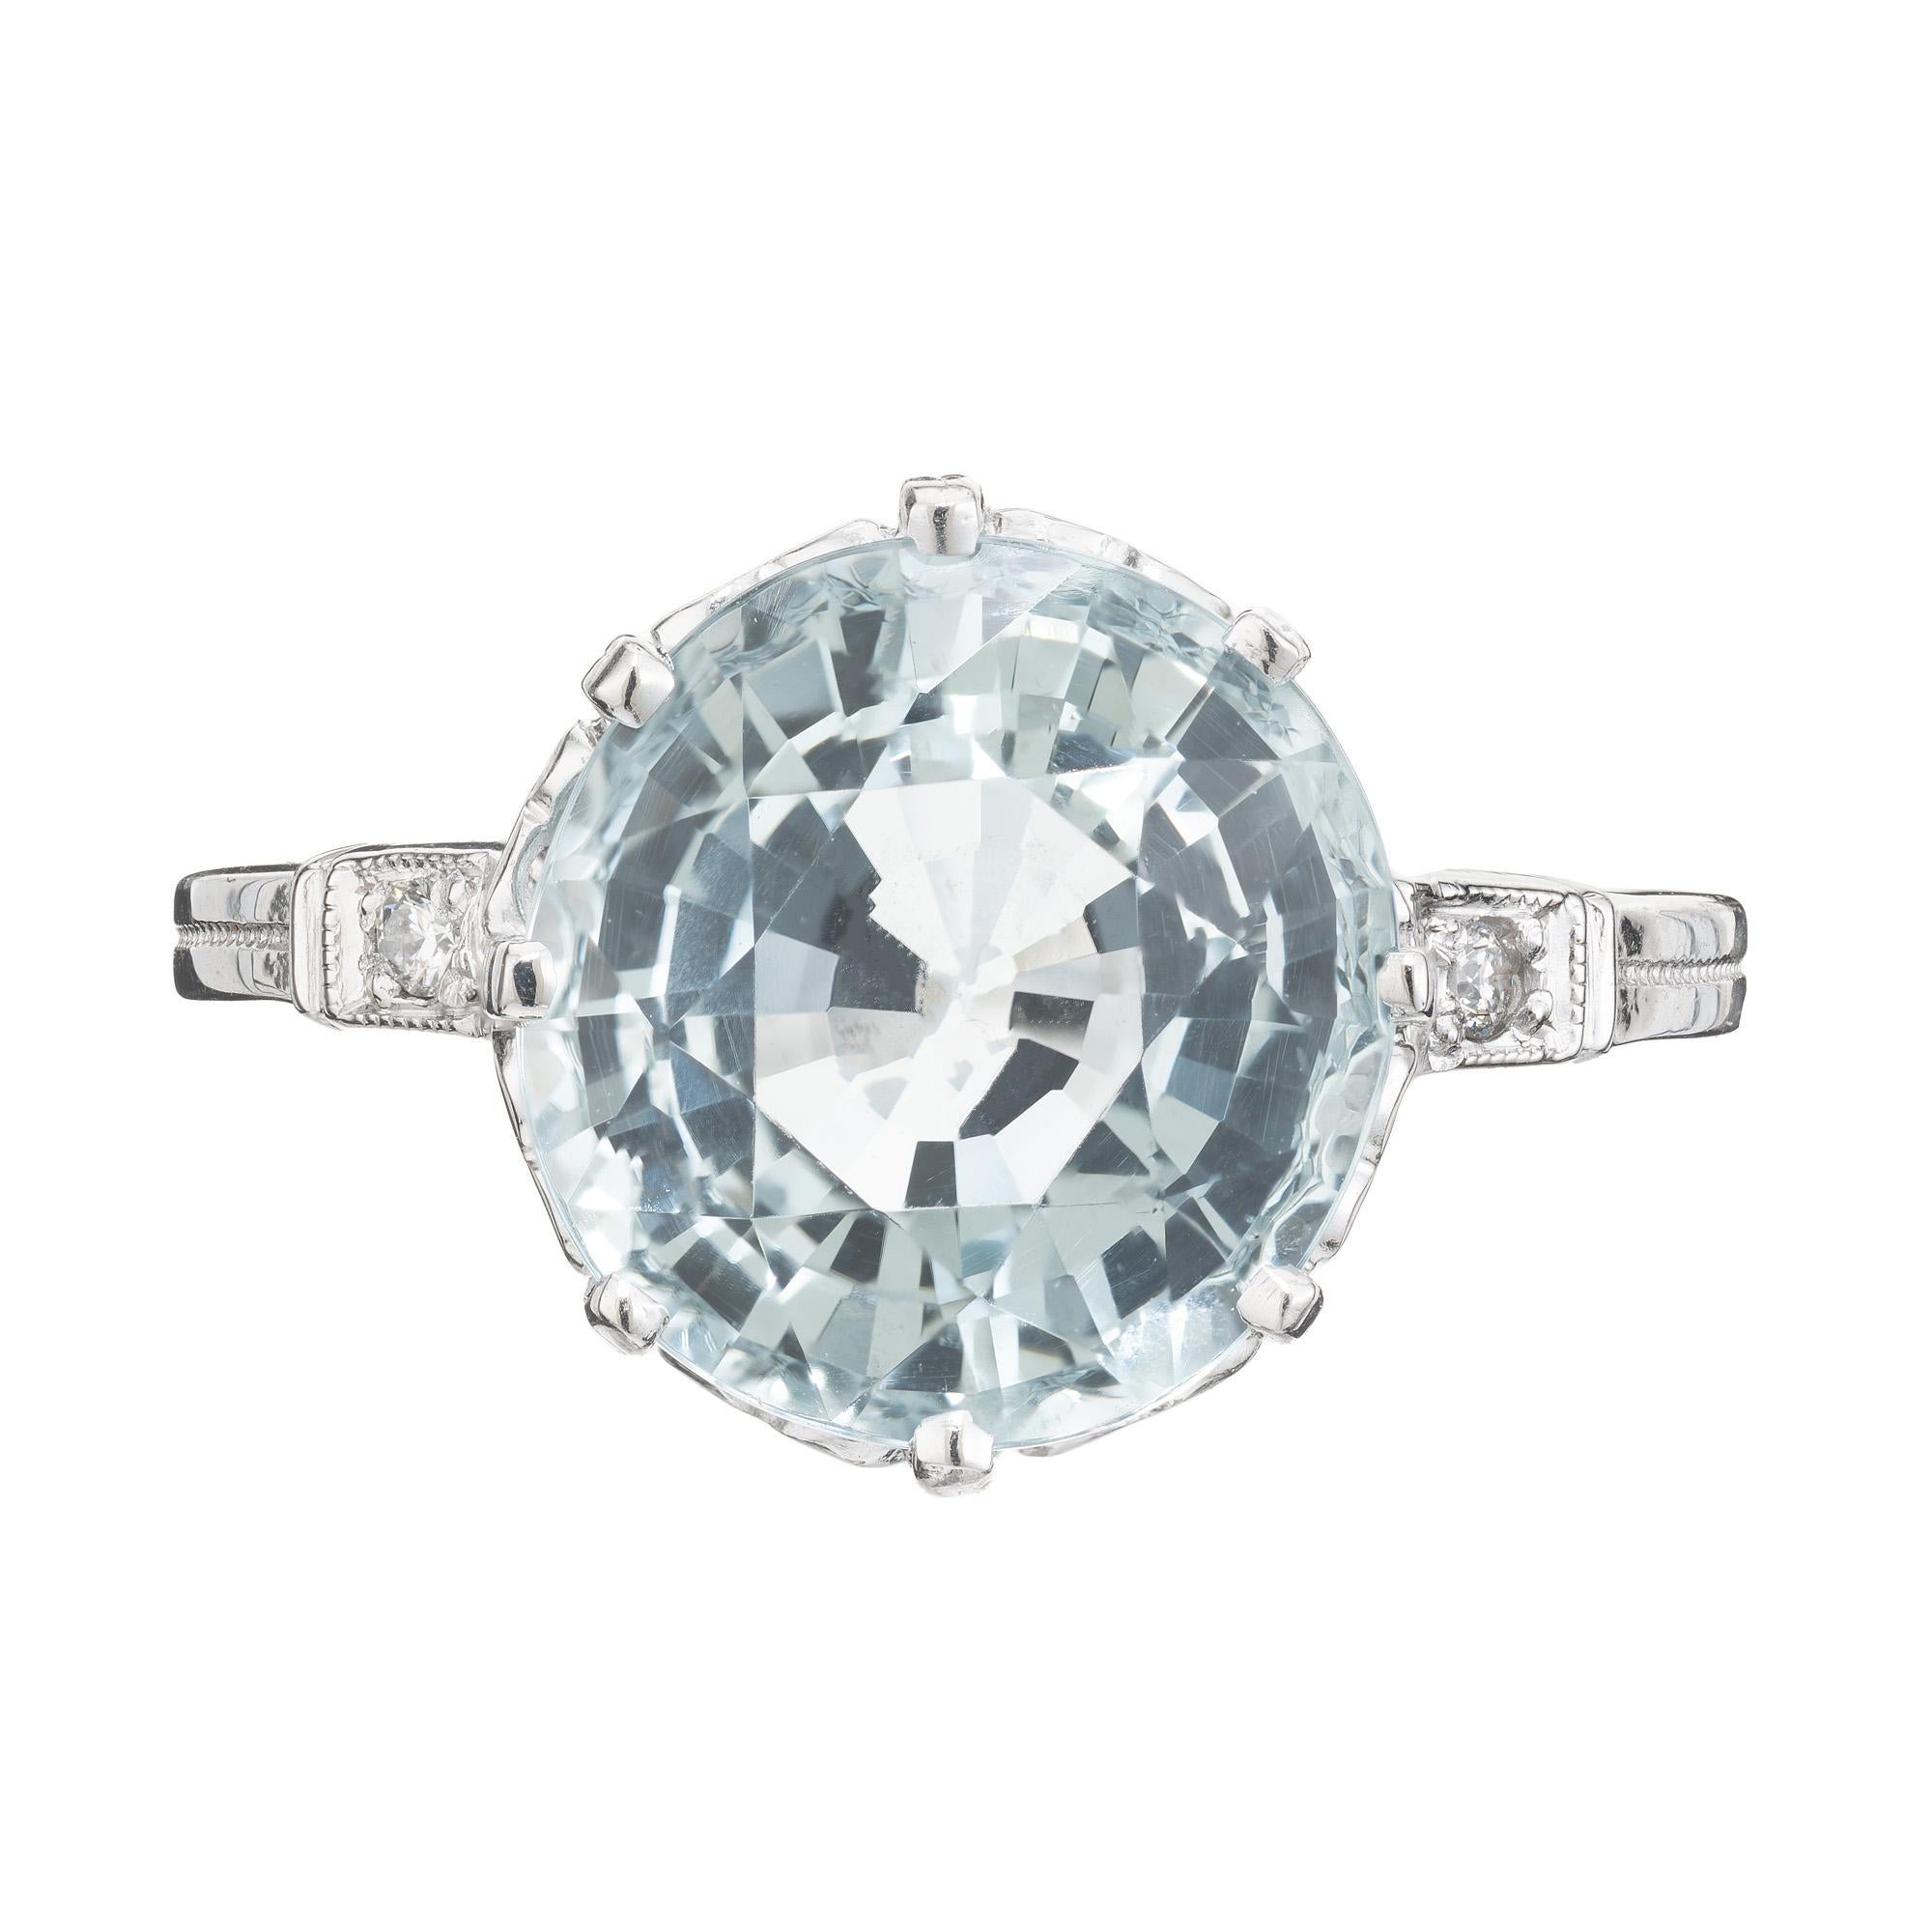 1920's 4.66ct round Aquamarine and Diamond Art Deco platinum engagement ring, a true embodiment of timeless elegance. At the heart of this captivating ring lies a breathtaking 4.66 carat round aquamarine dazzler, with an ocean blue hue. The aqua is